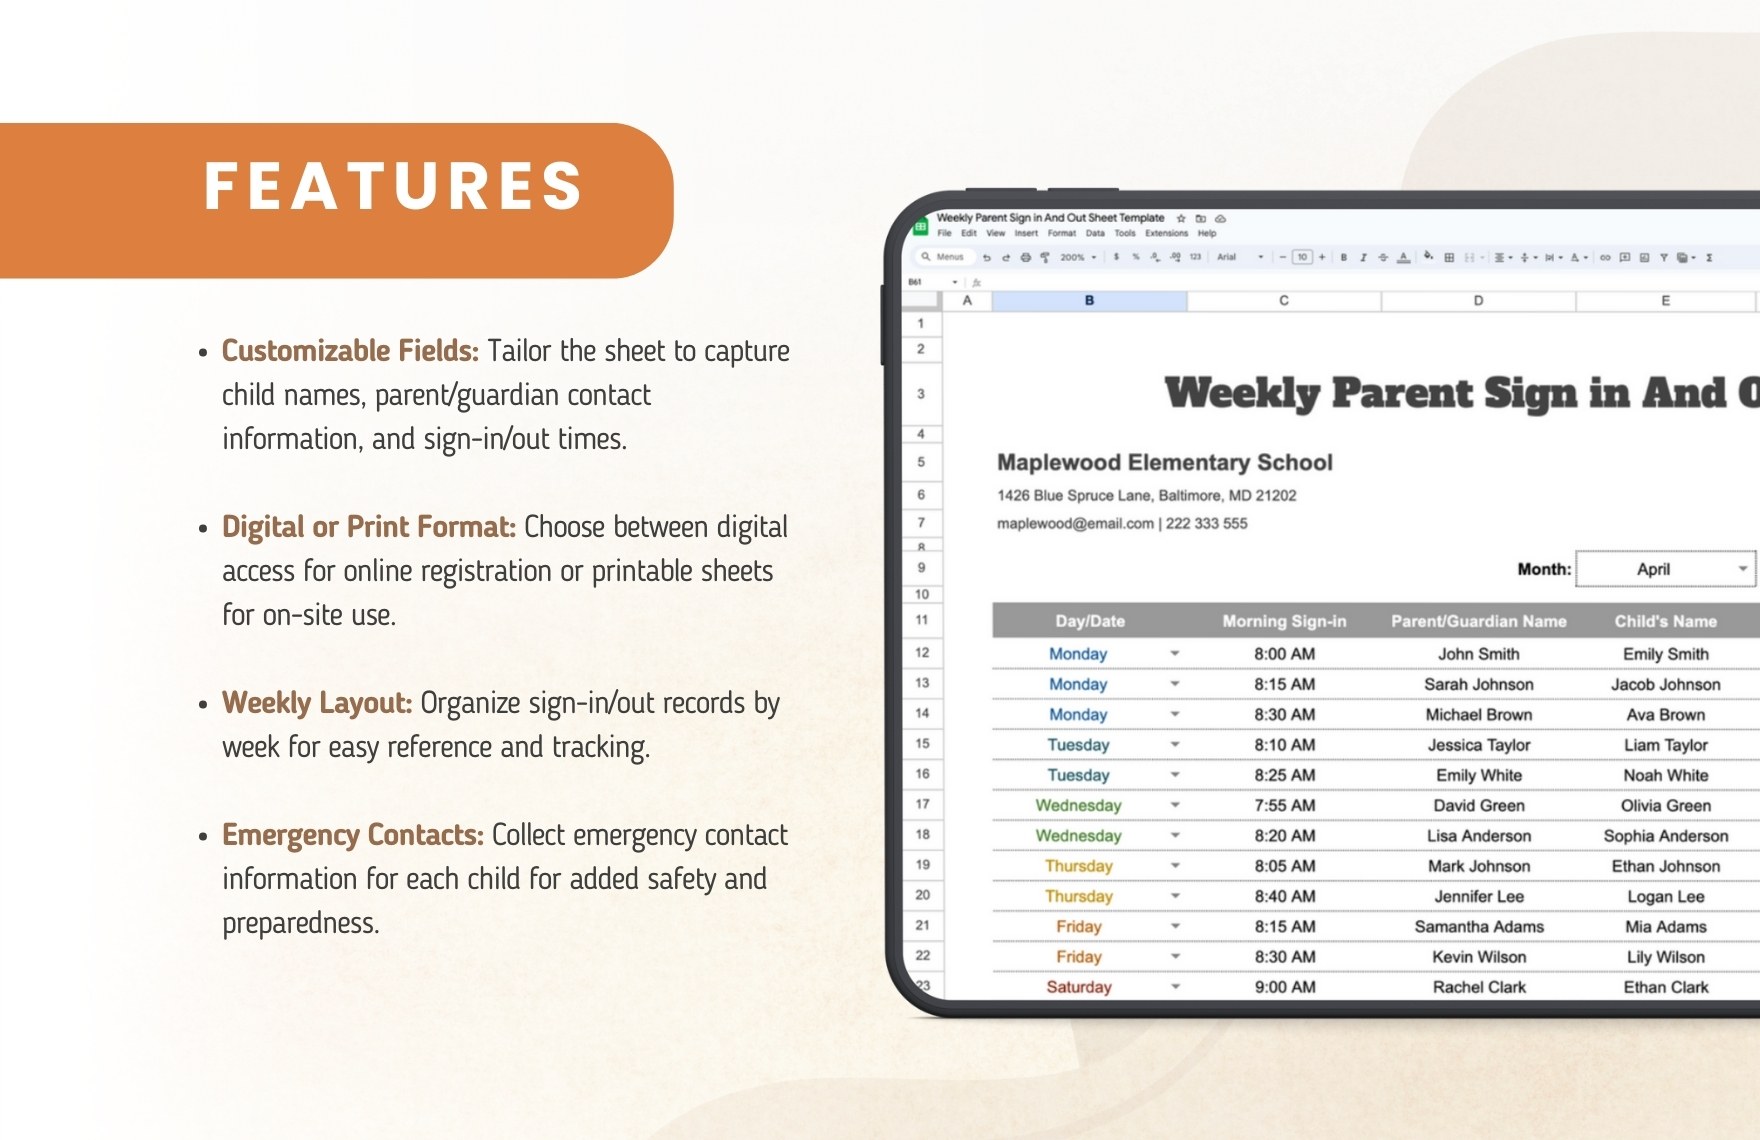 Weekly Parent Sign in And Out Sheet Template